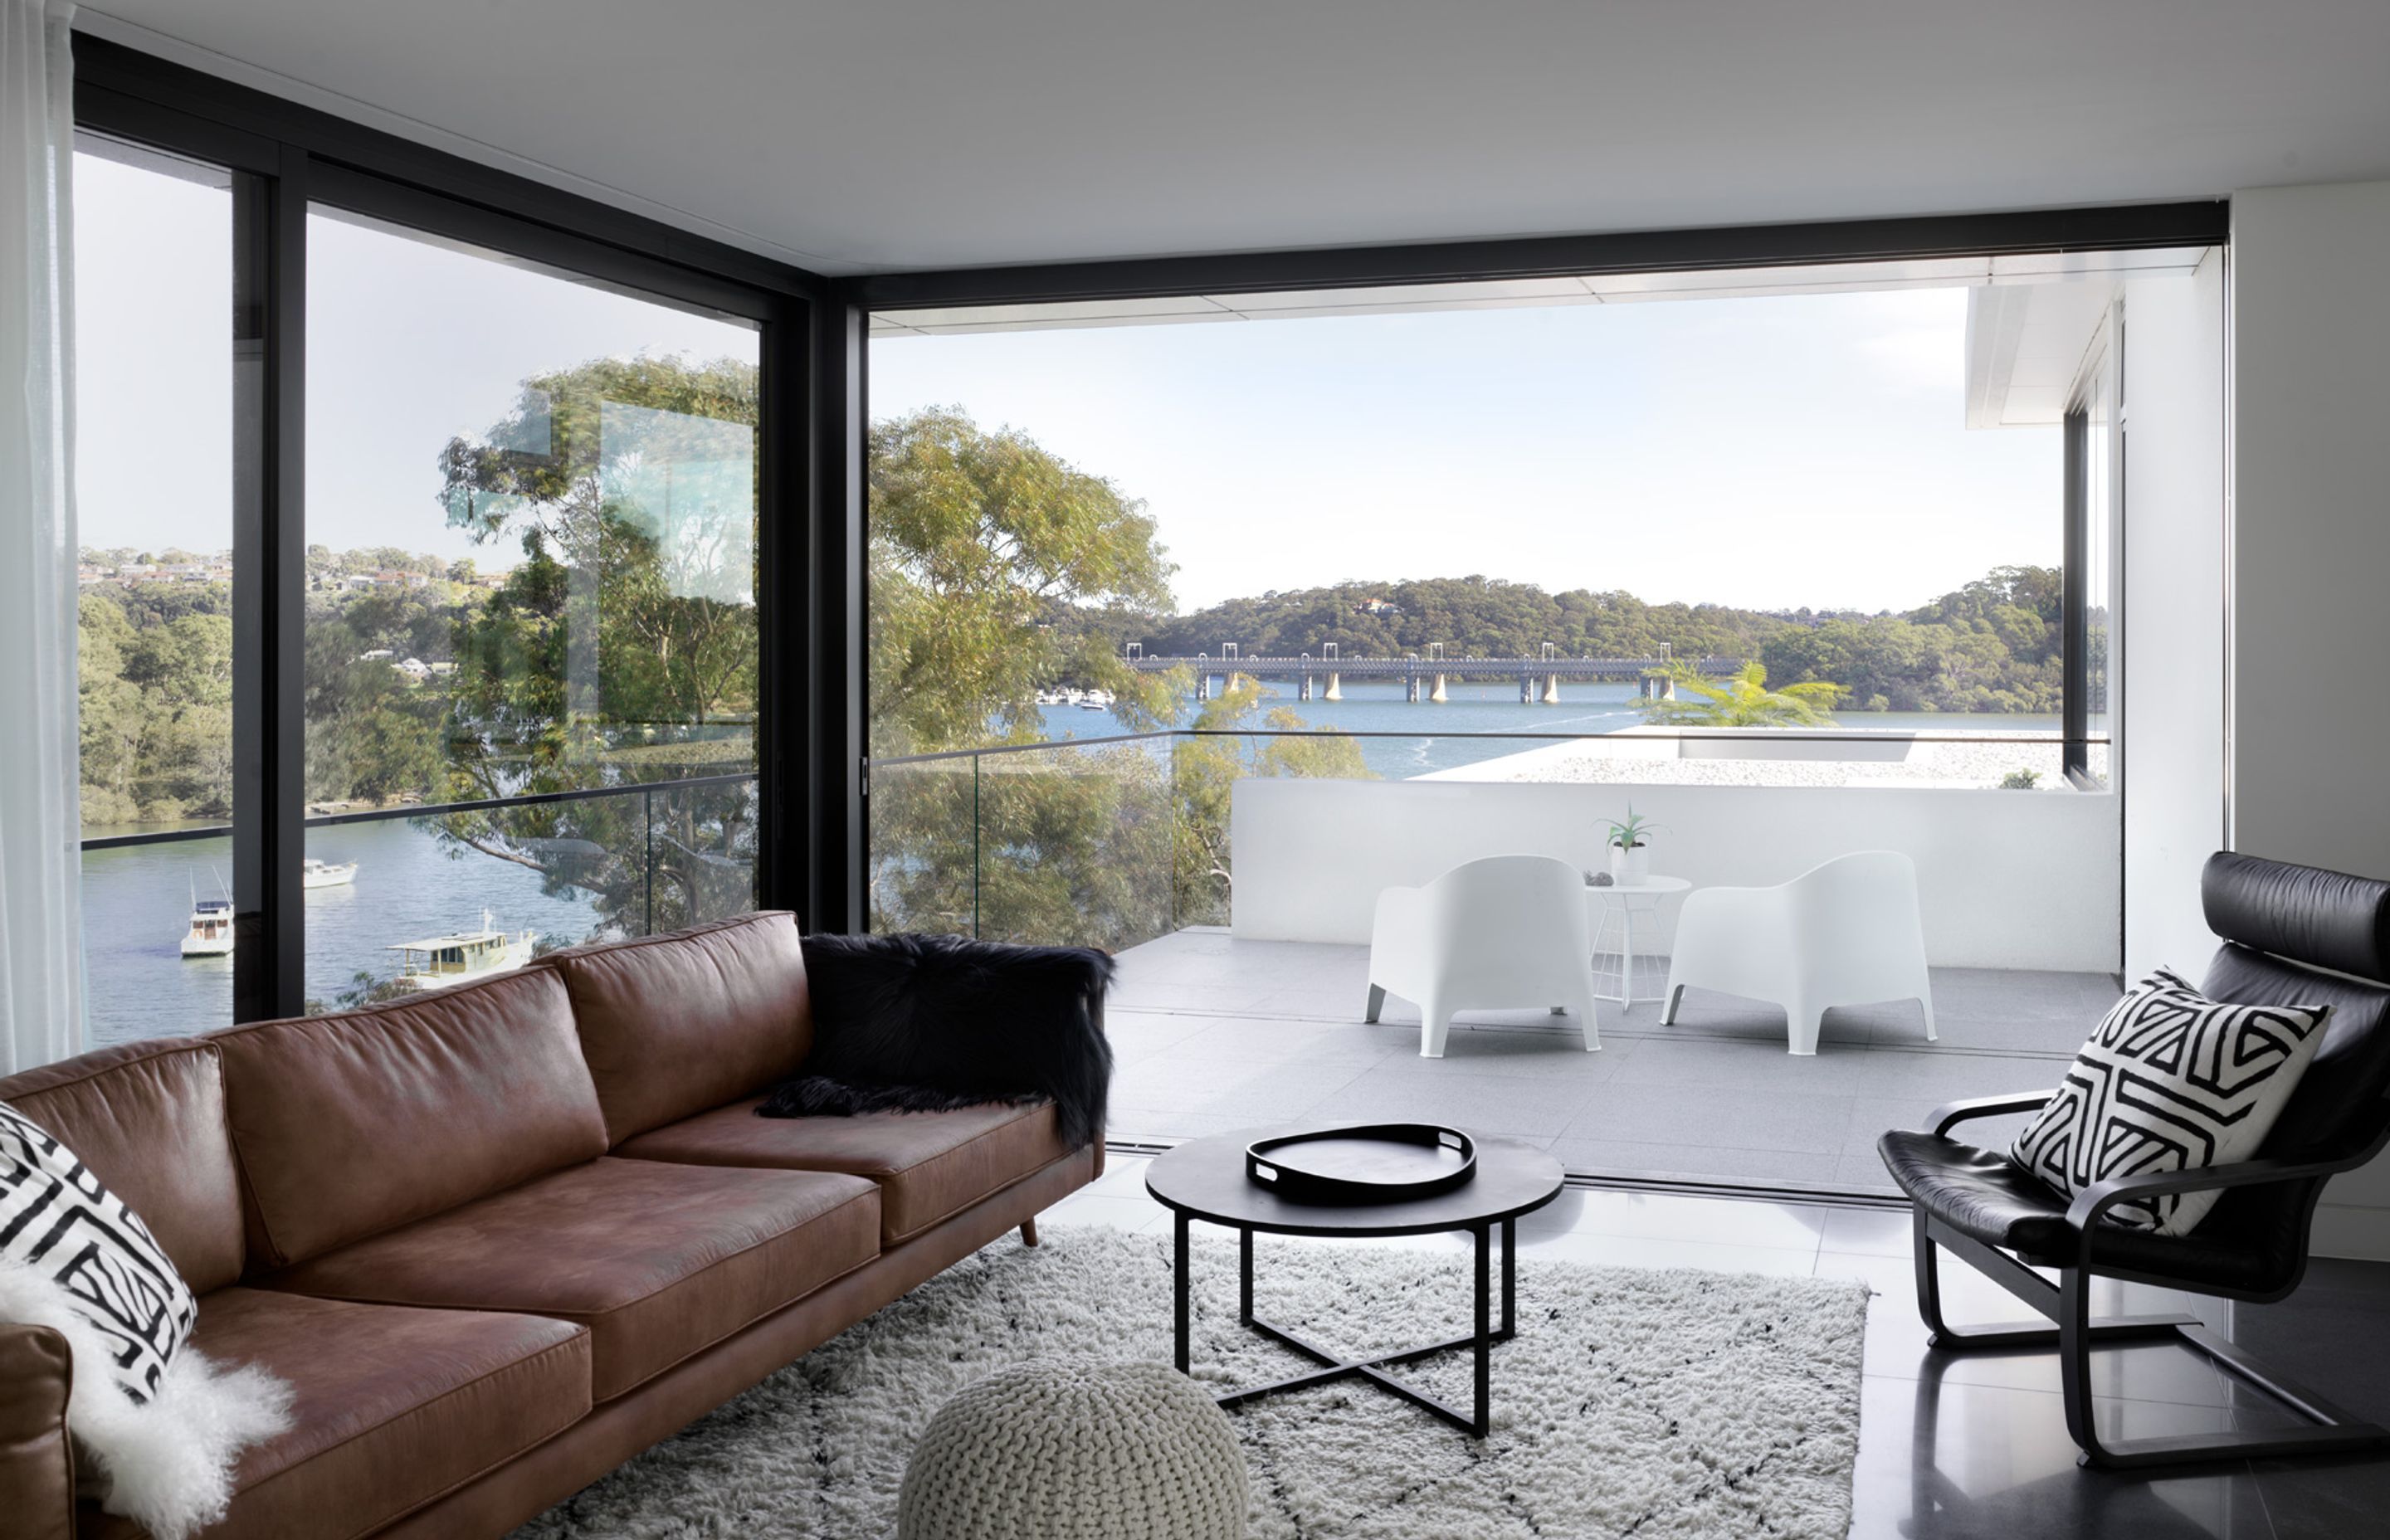 Oyster Bay House by Couvaras Architects, Bakker Built and Farrugia Design | Photography by Luke Butterly